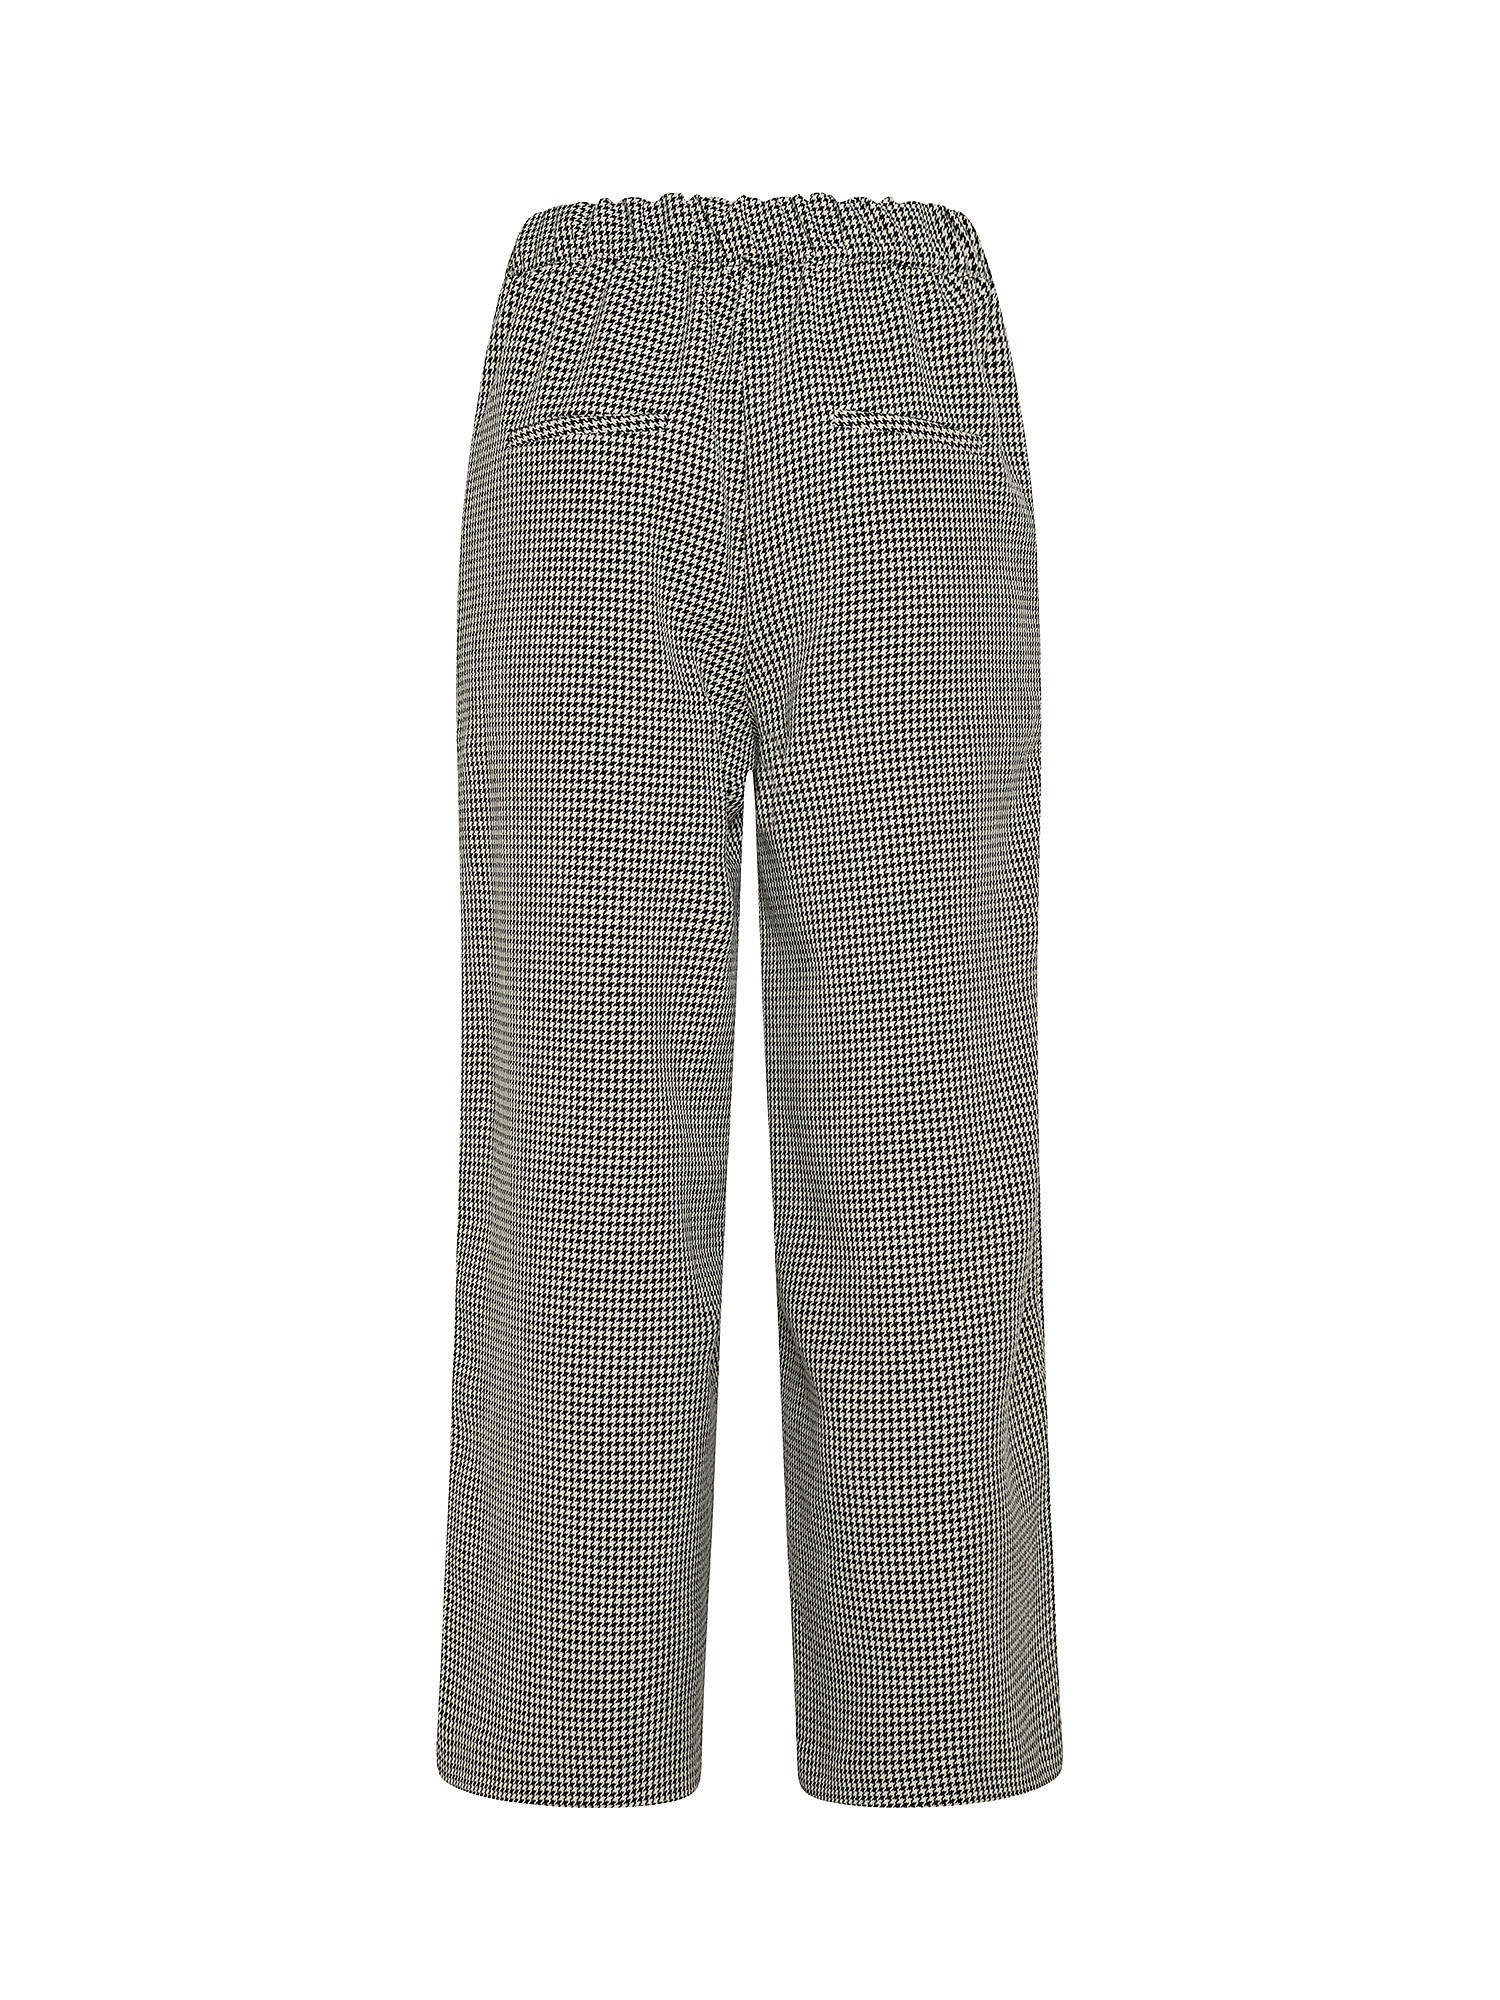 Houndstooth trousers, White, large image number 1